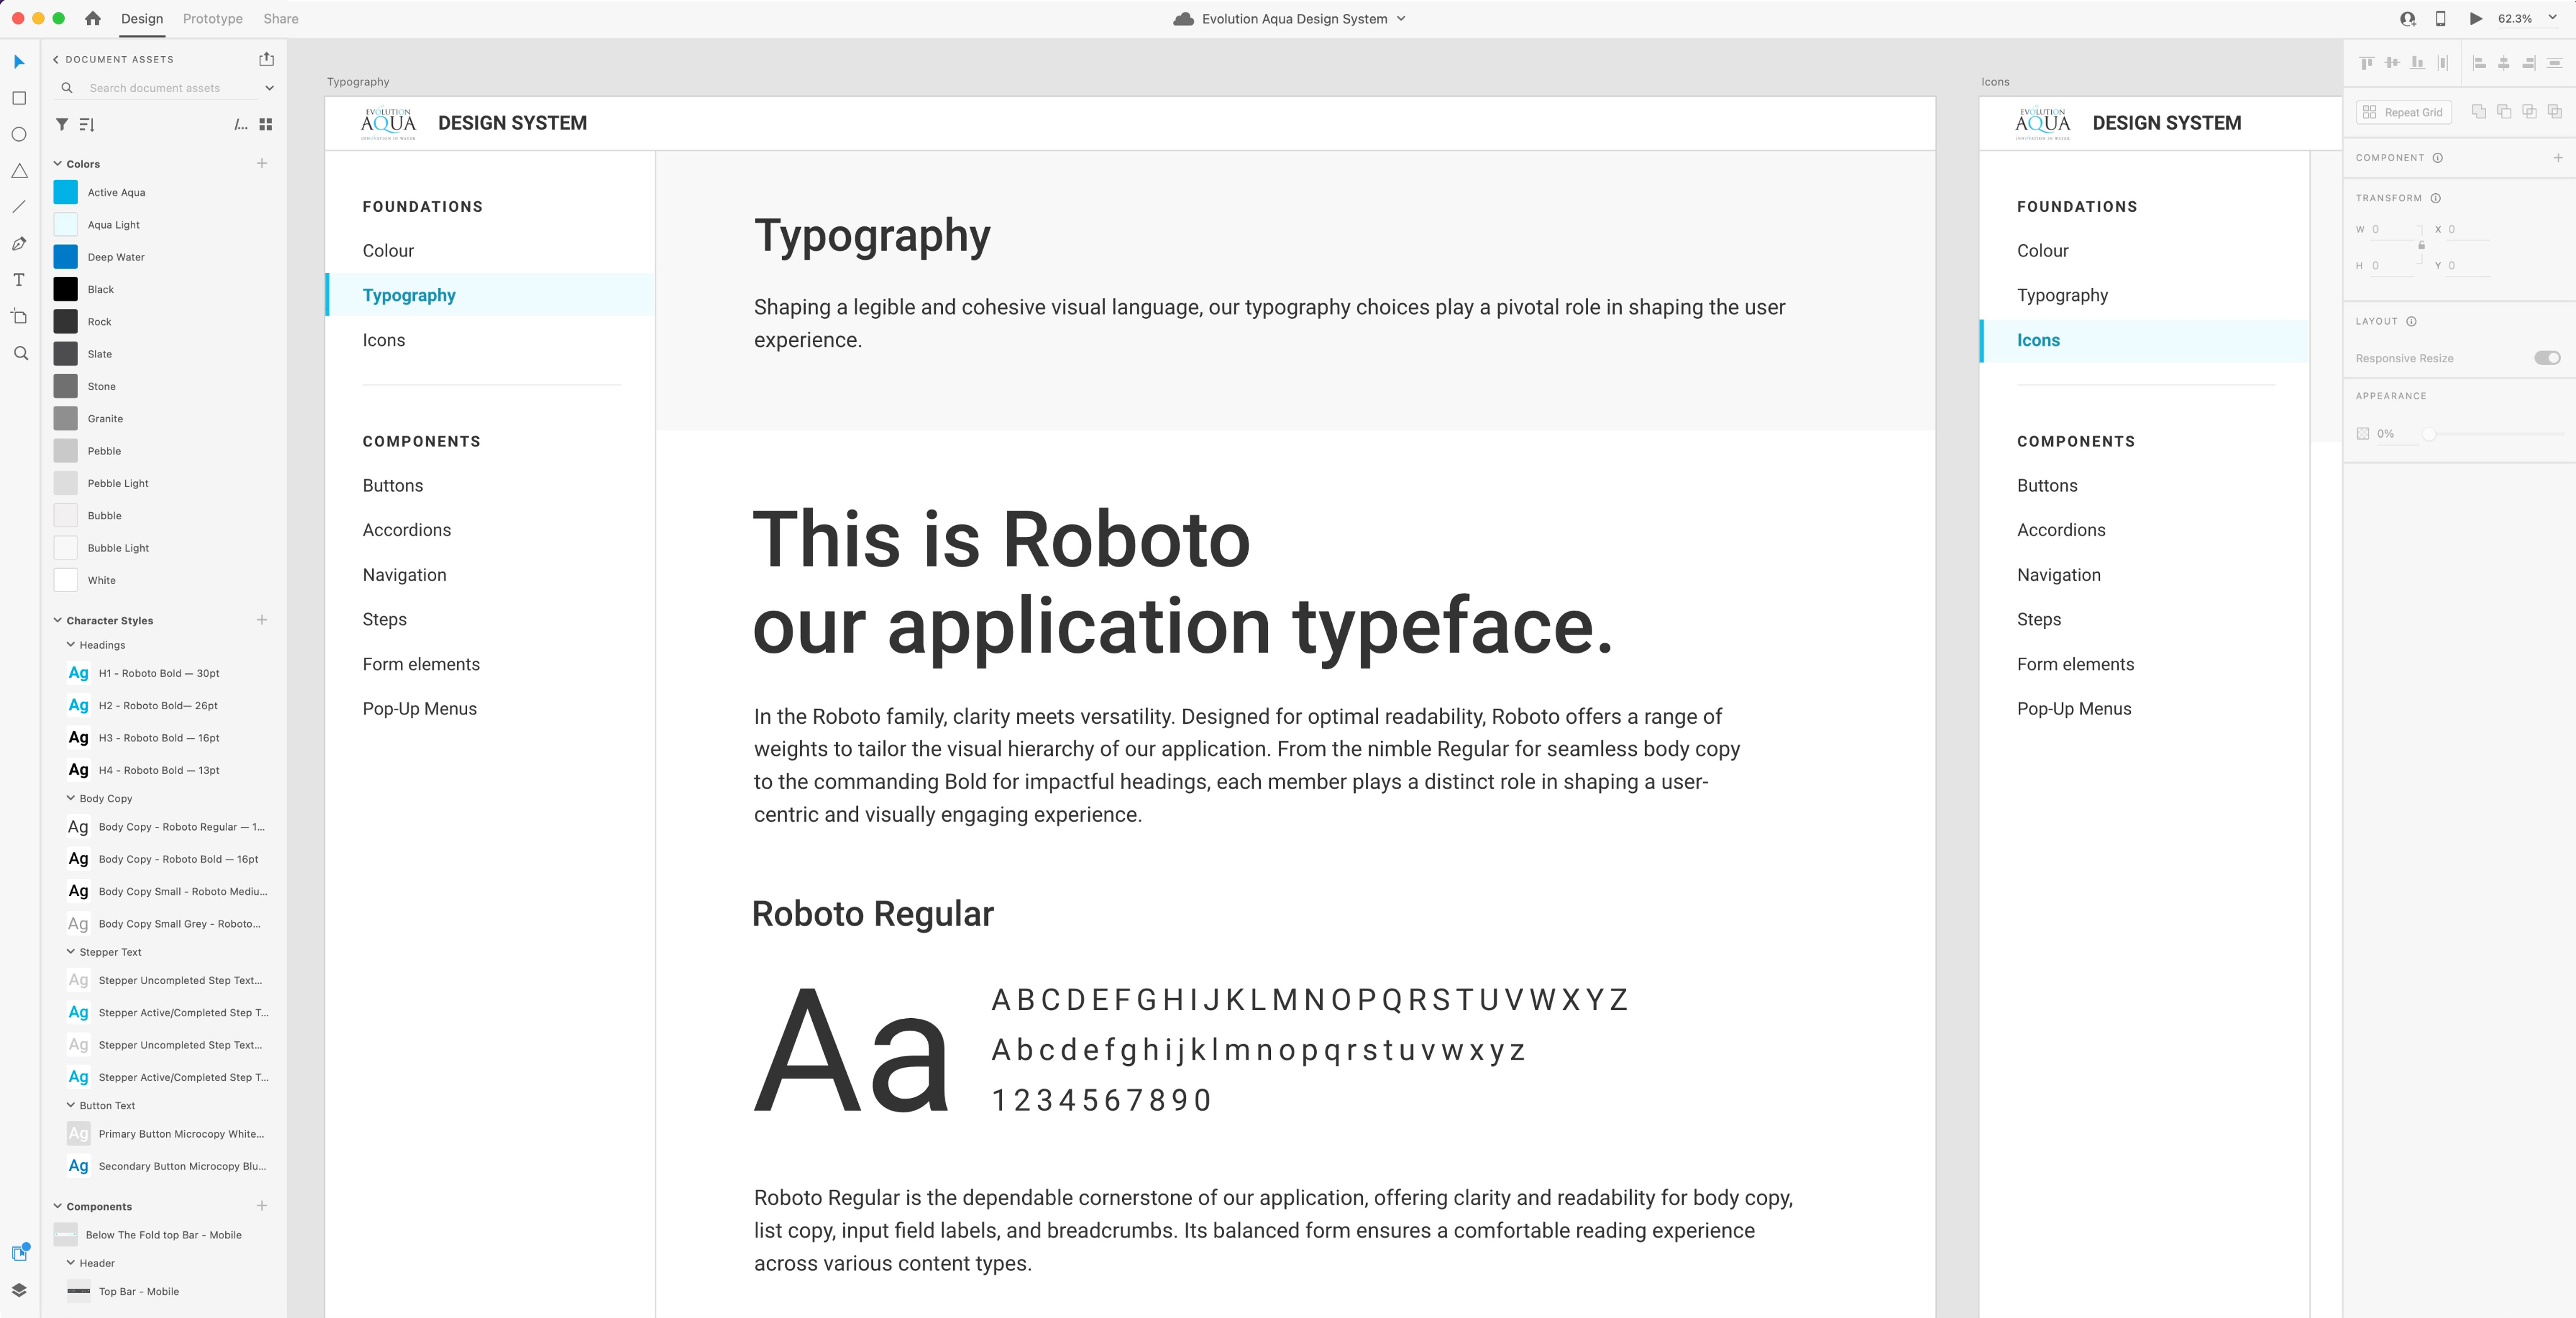 Image showing a page of Typography section of the design system.